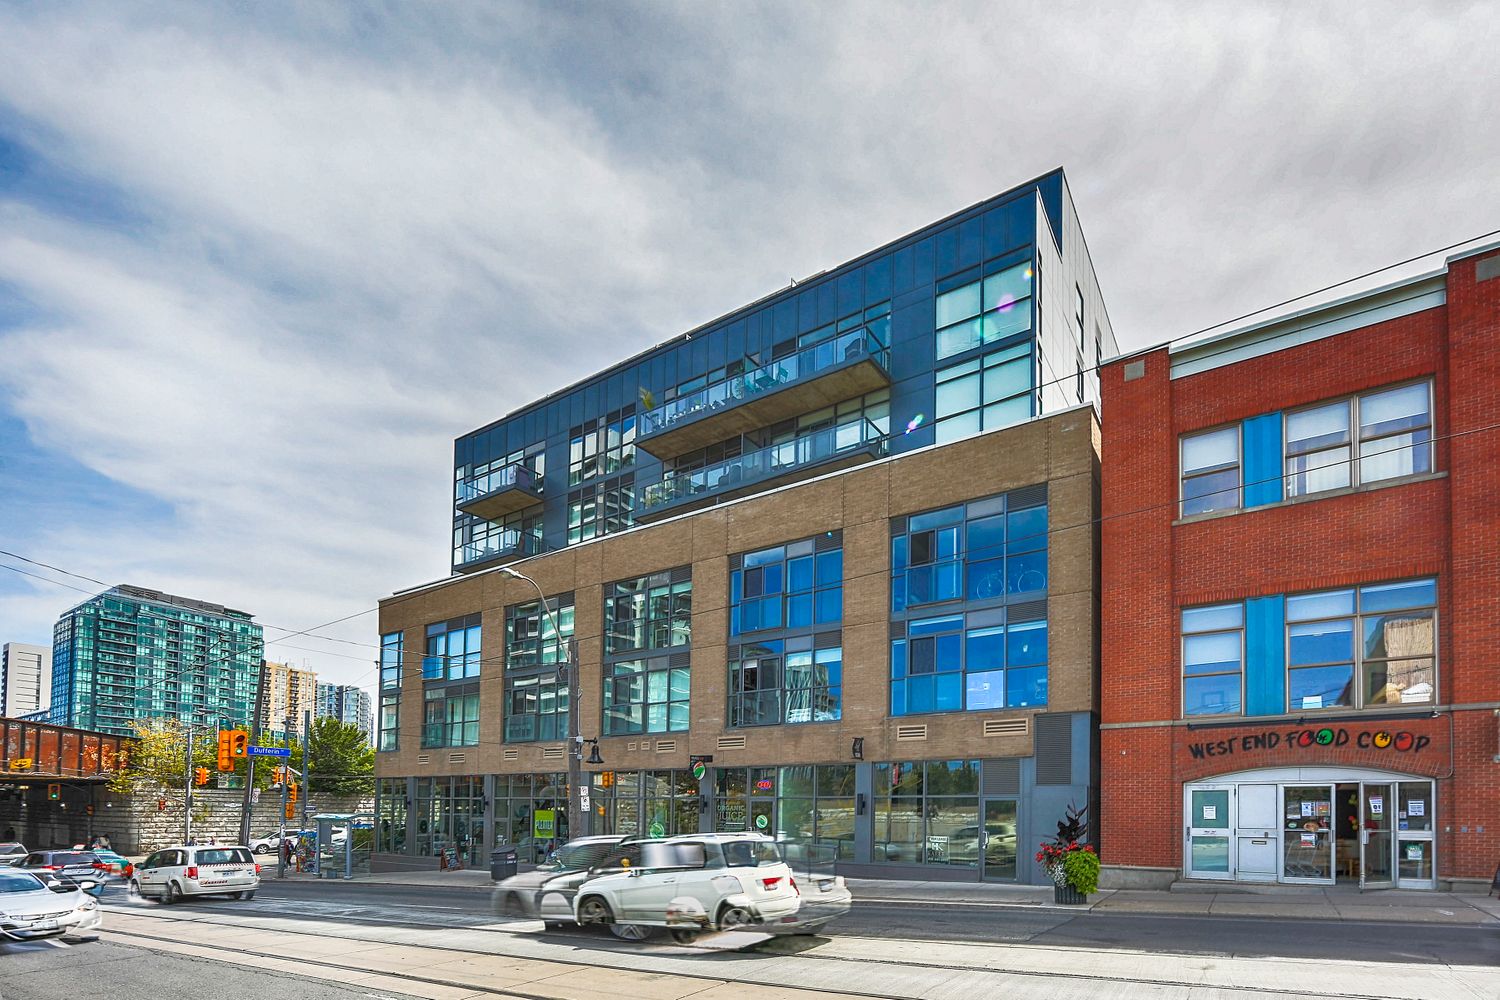 1205 Queen Street W. Q Loft is located in  West End, Toronto - image #2 of 5